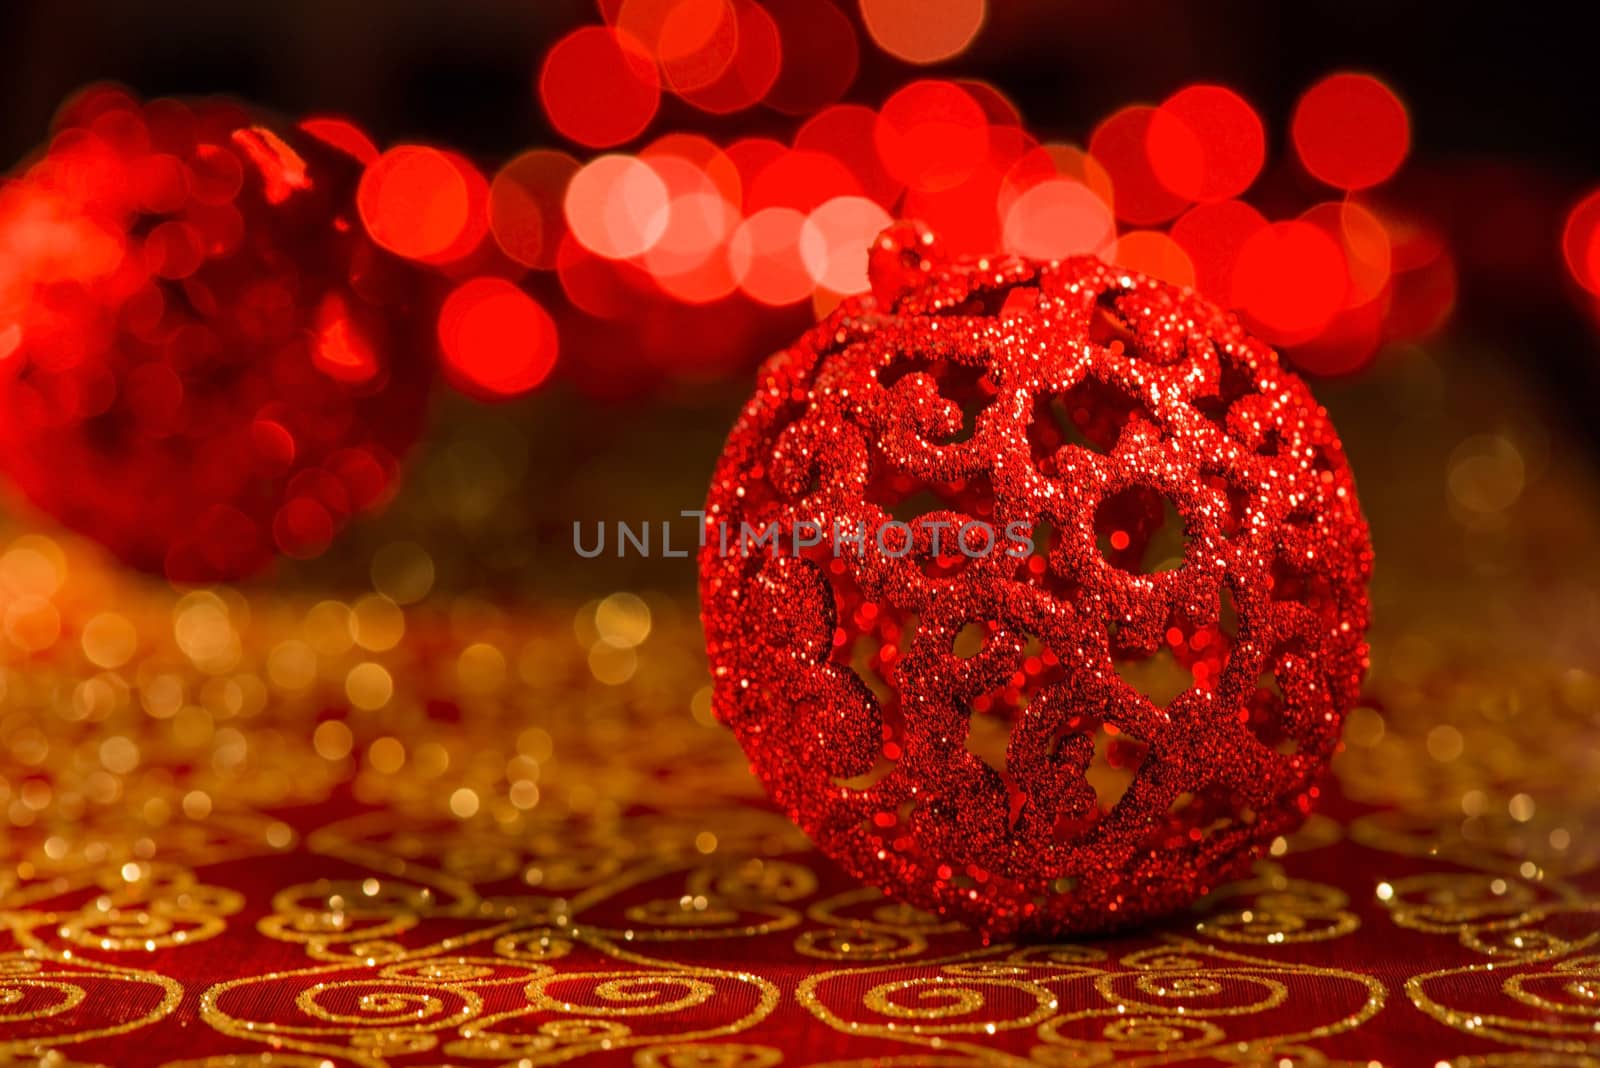 Red Christmas ornaments with red blur lights